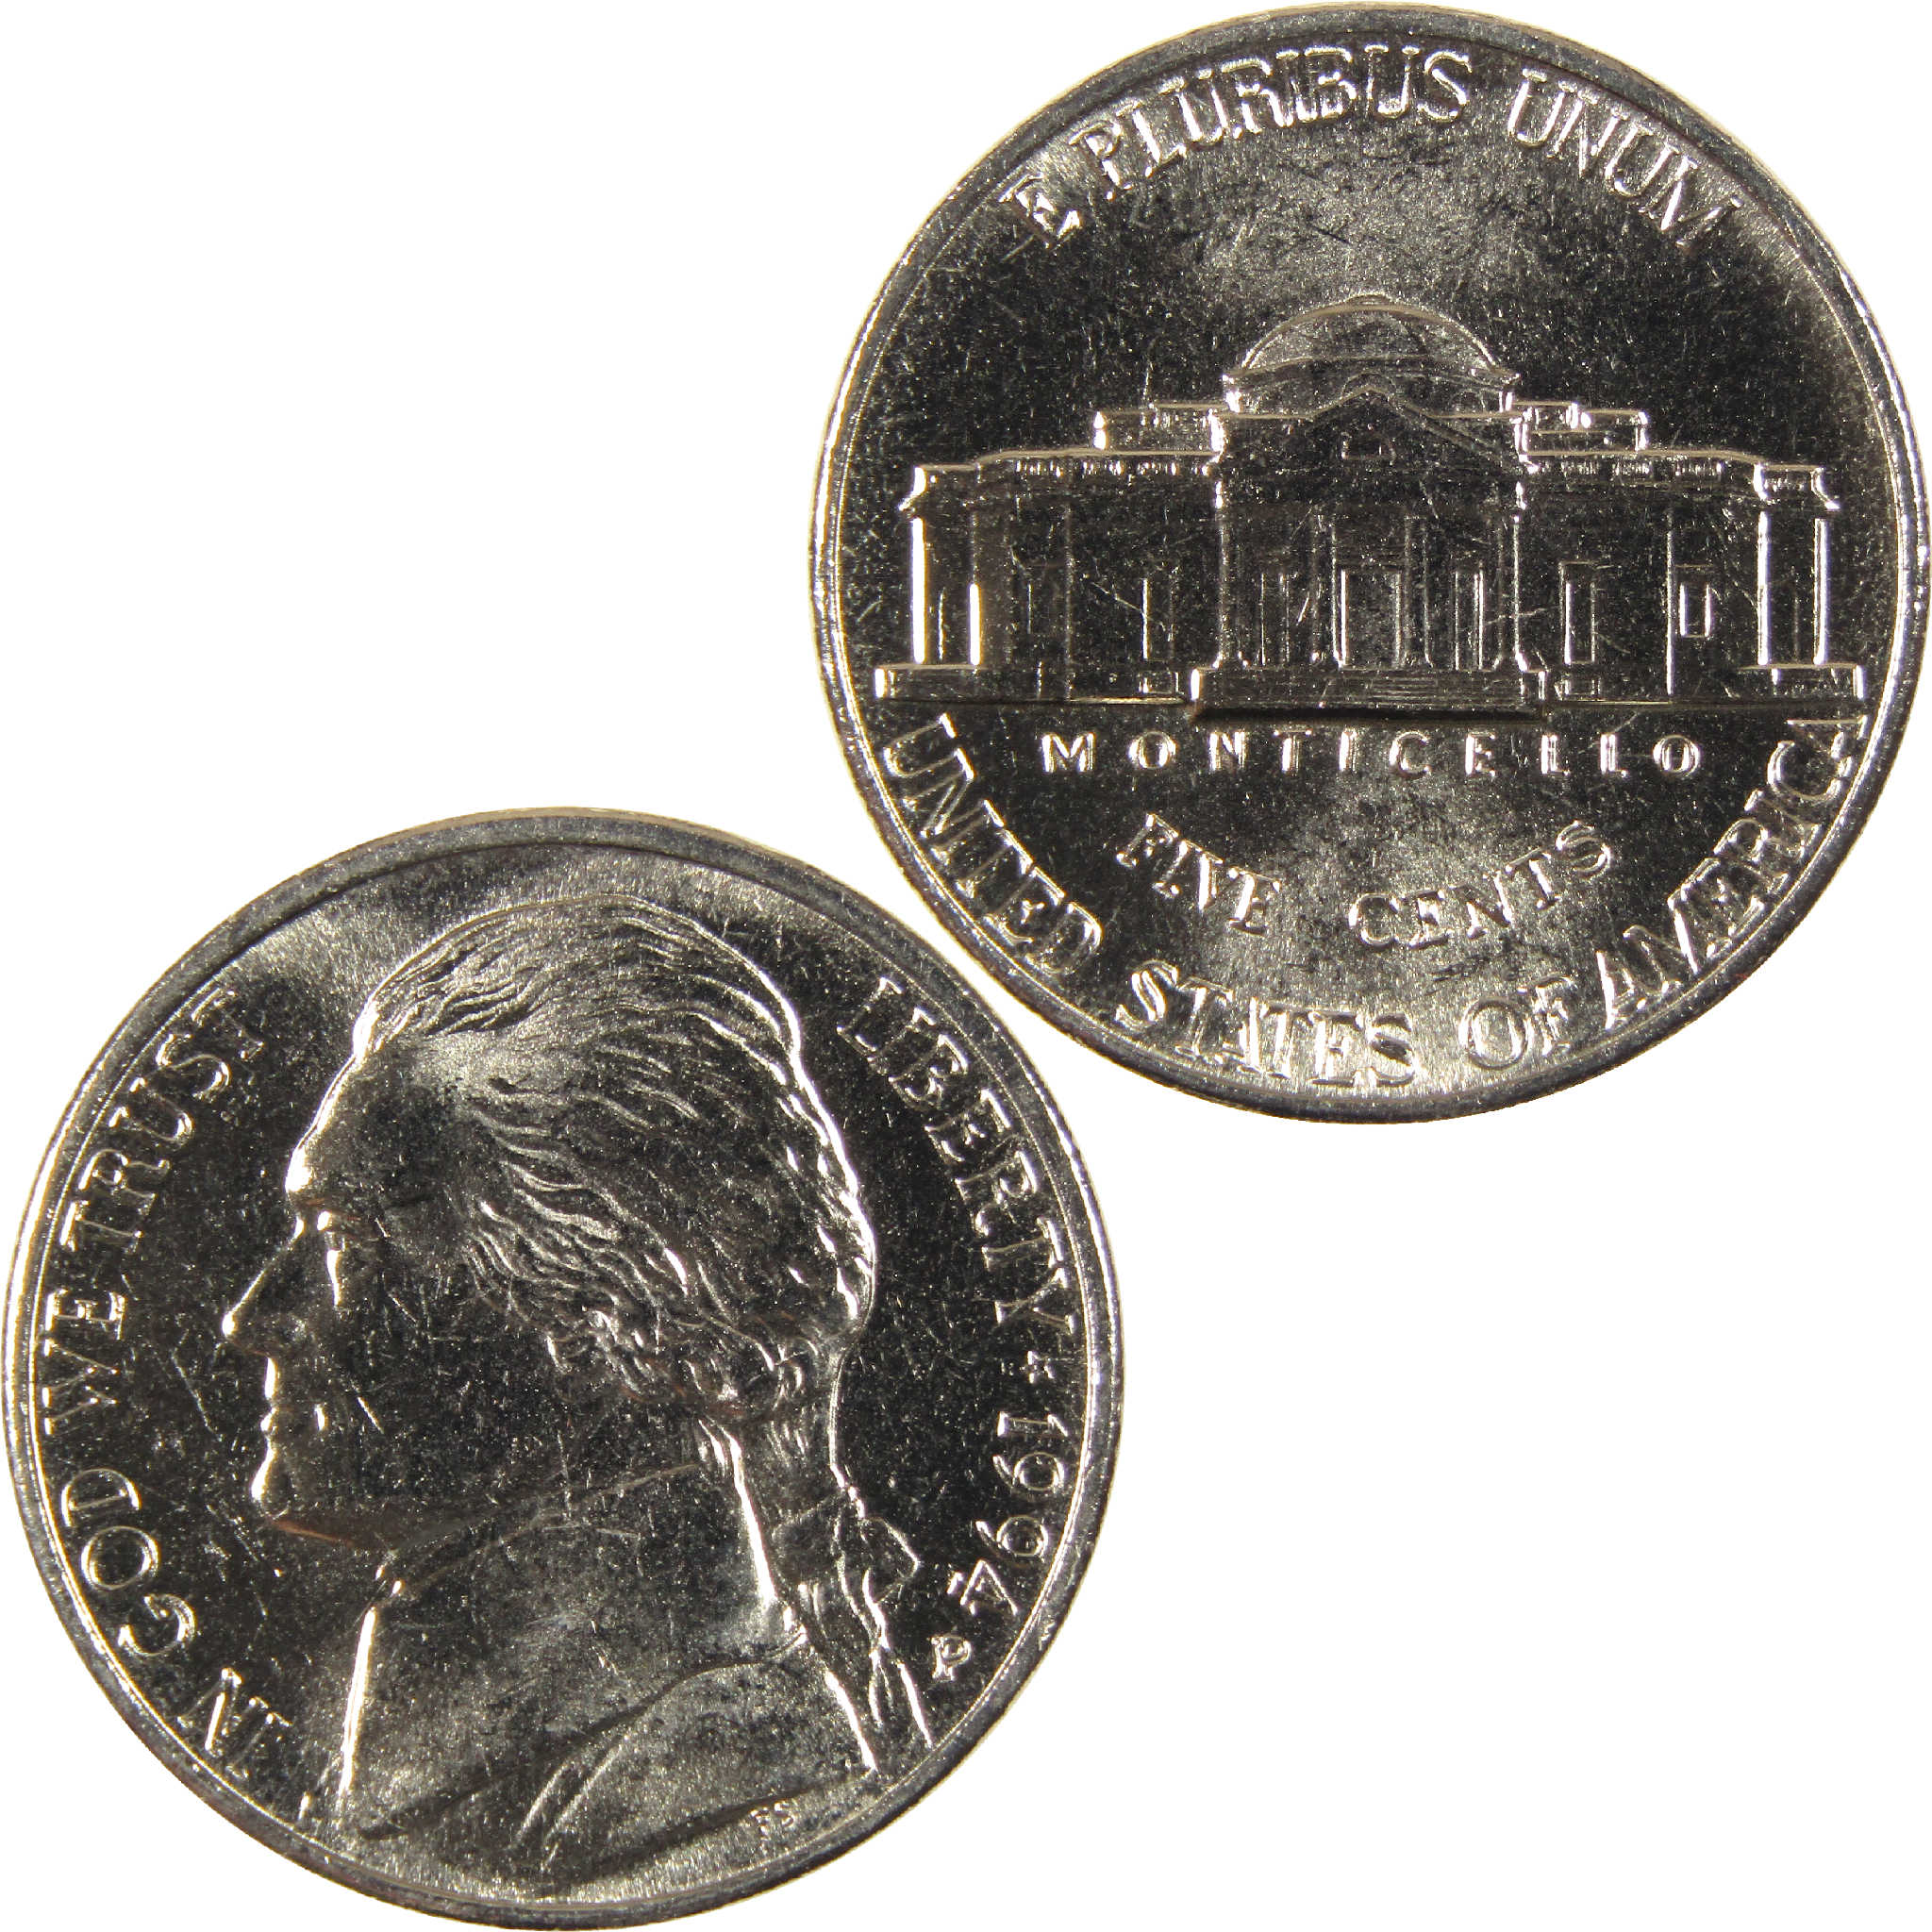 1994 P Jefferson Nickel Uncirculated 5c Coin